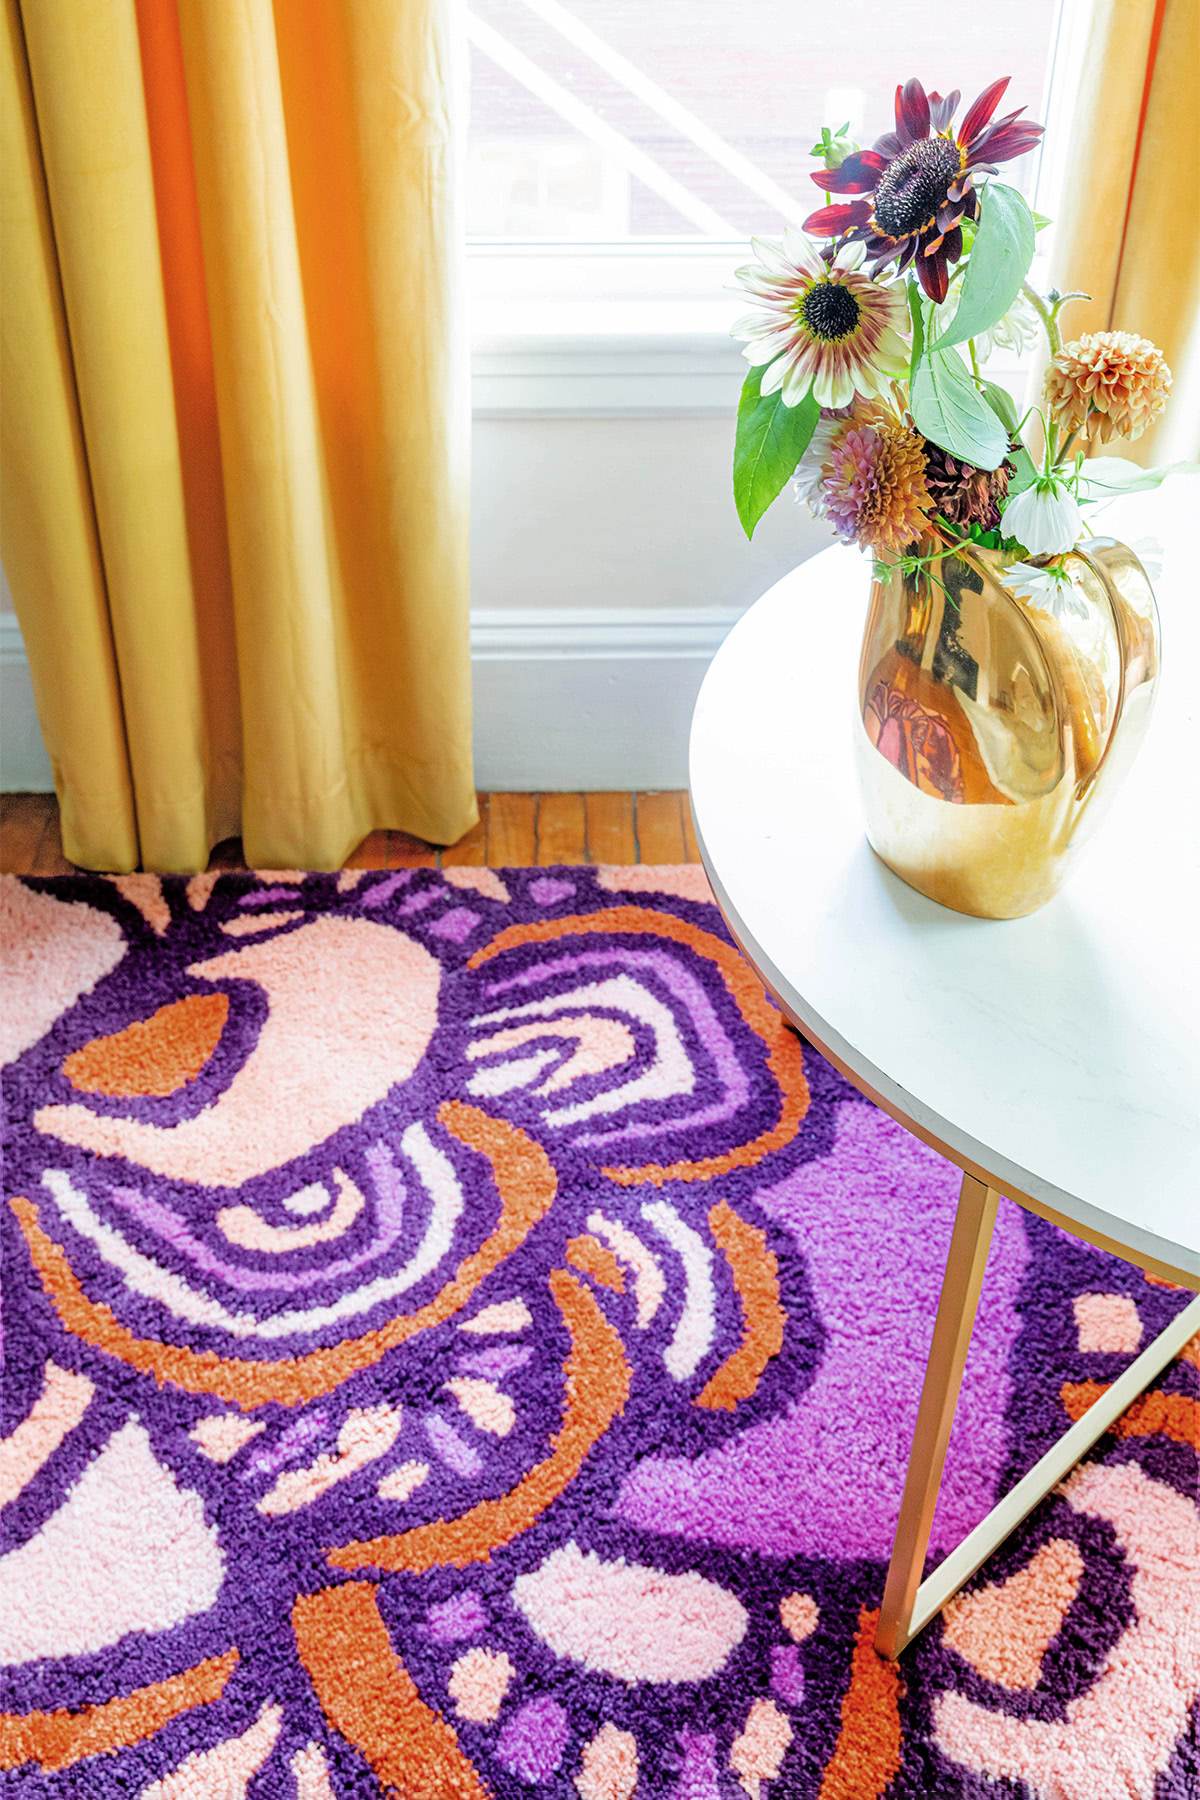 A sunny room with flowers on a table sitting on a red, and pink floral pattern, modern area rug called Maeve Tulip